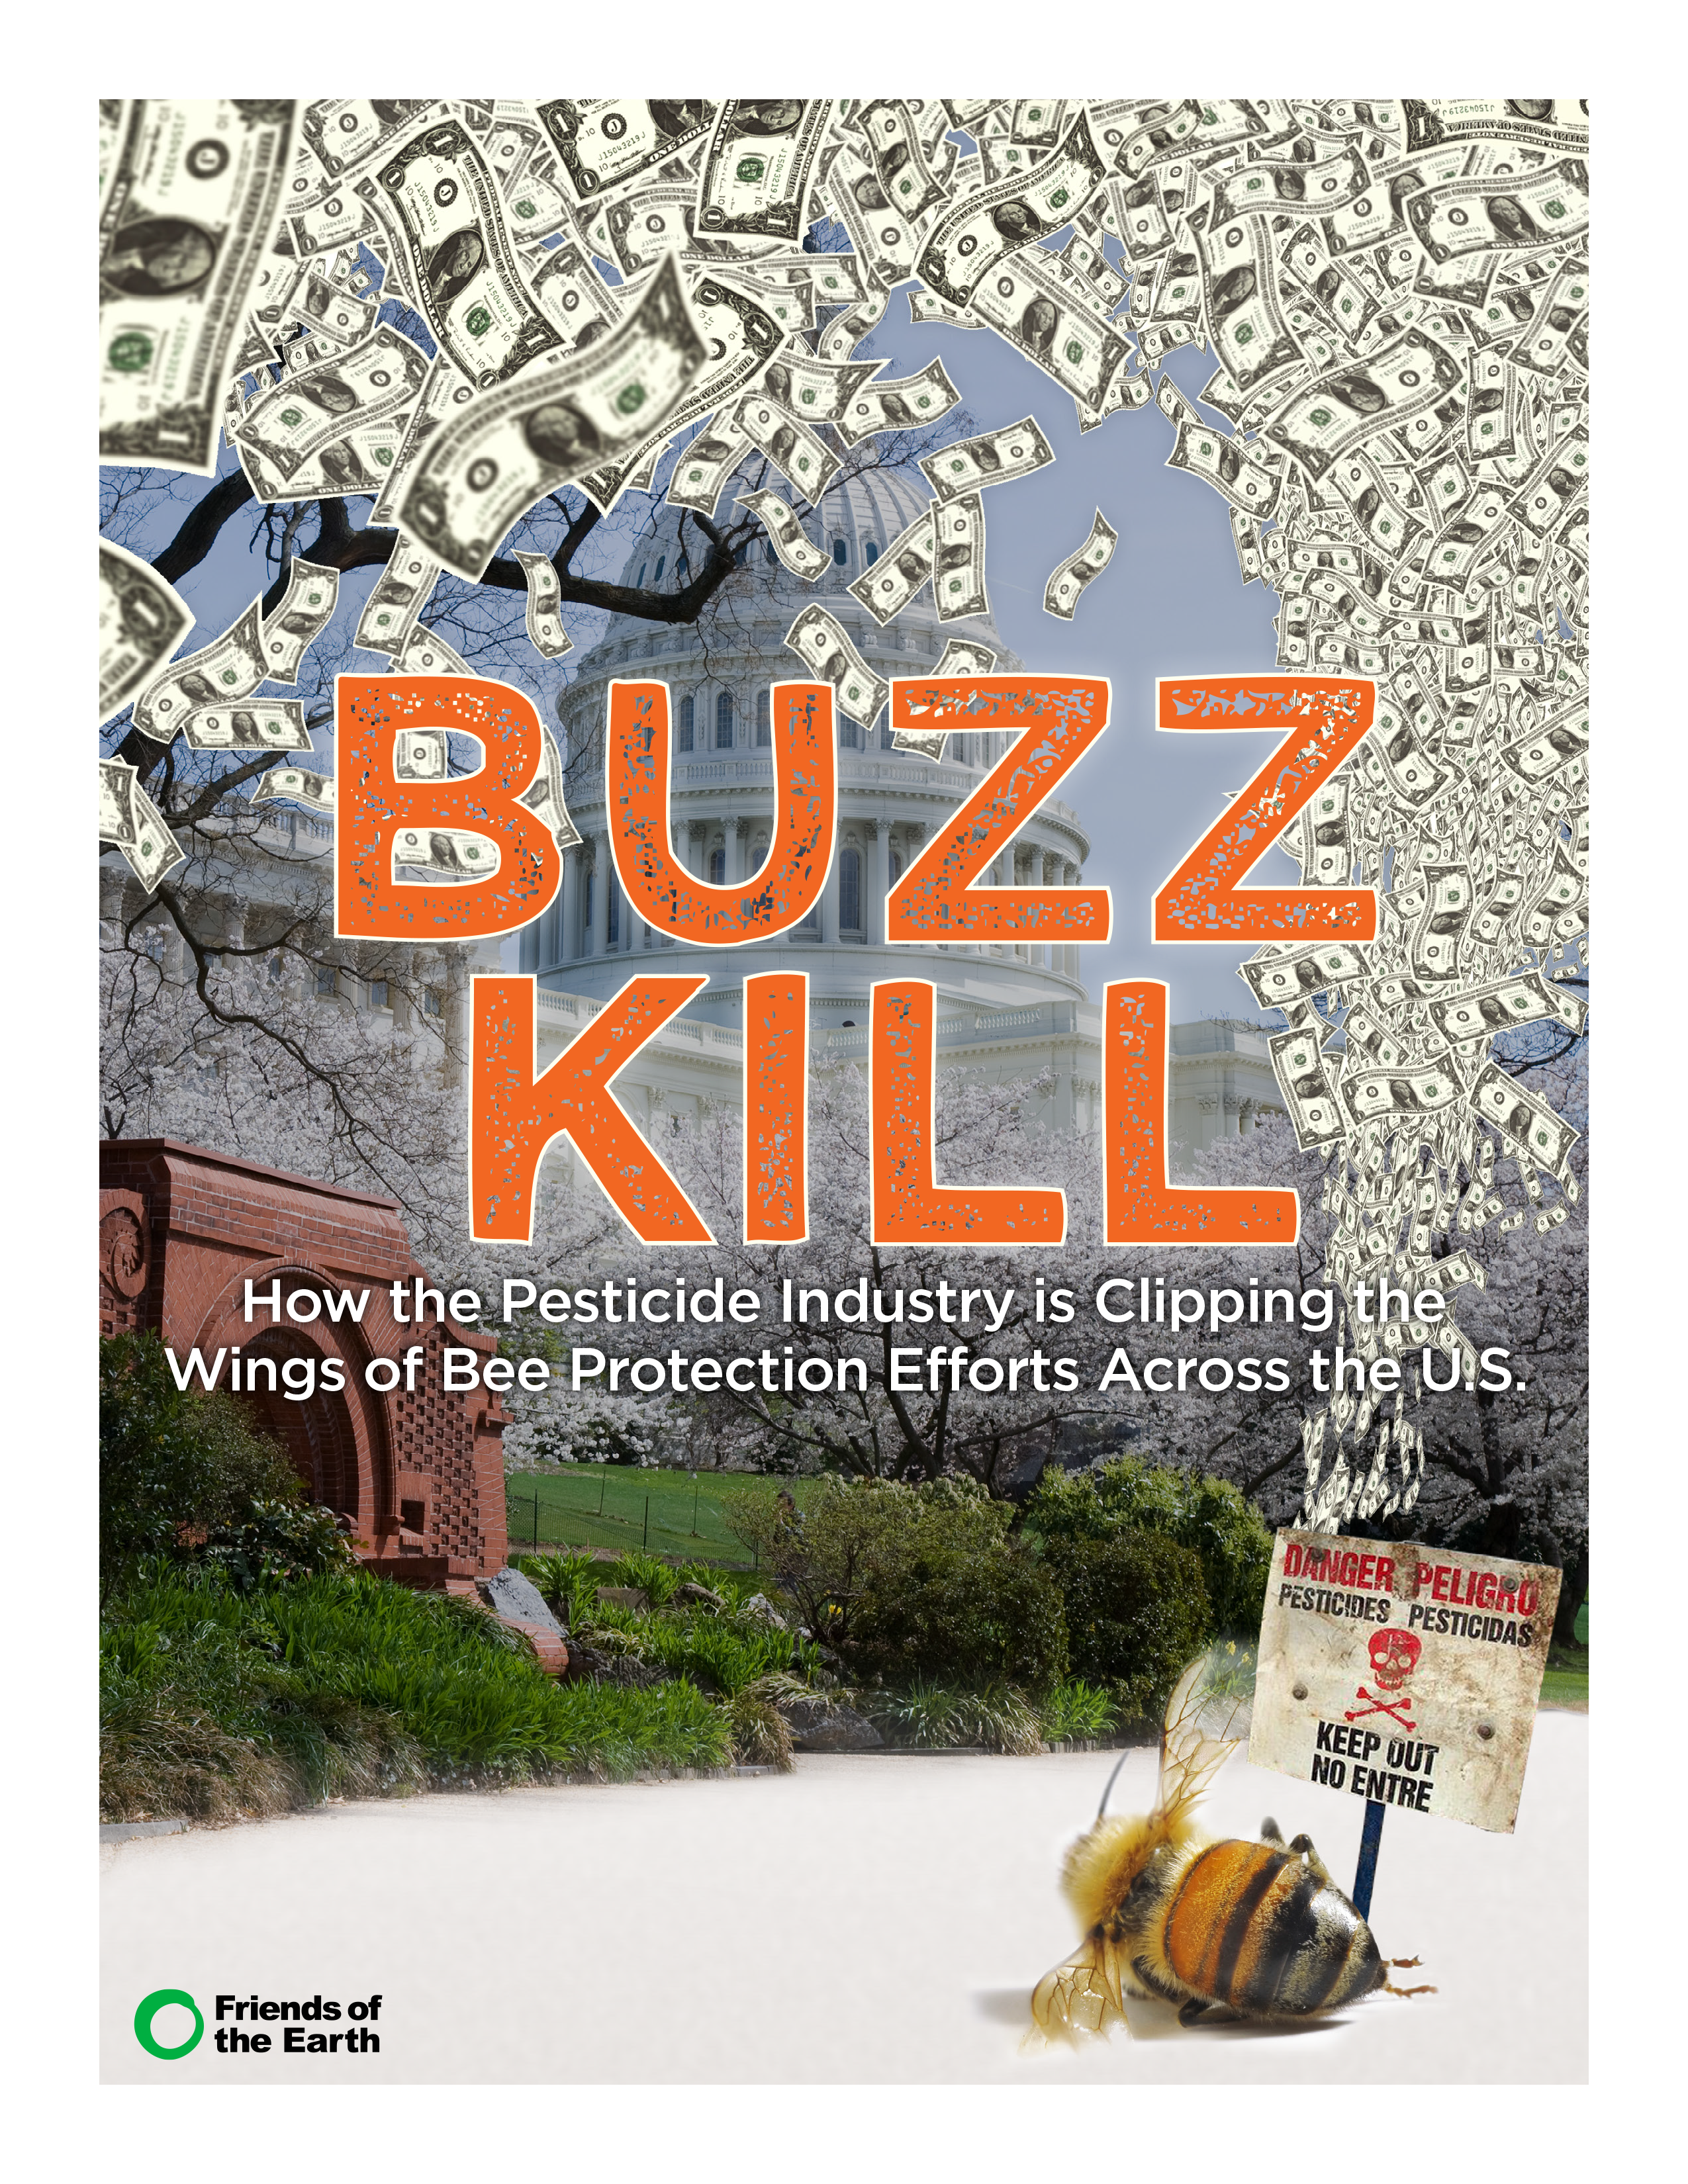 Buzz Kill: How the Pesticide Industry is Clipping the Wings of Bee Protection Efforts Across the U.S.